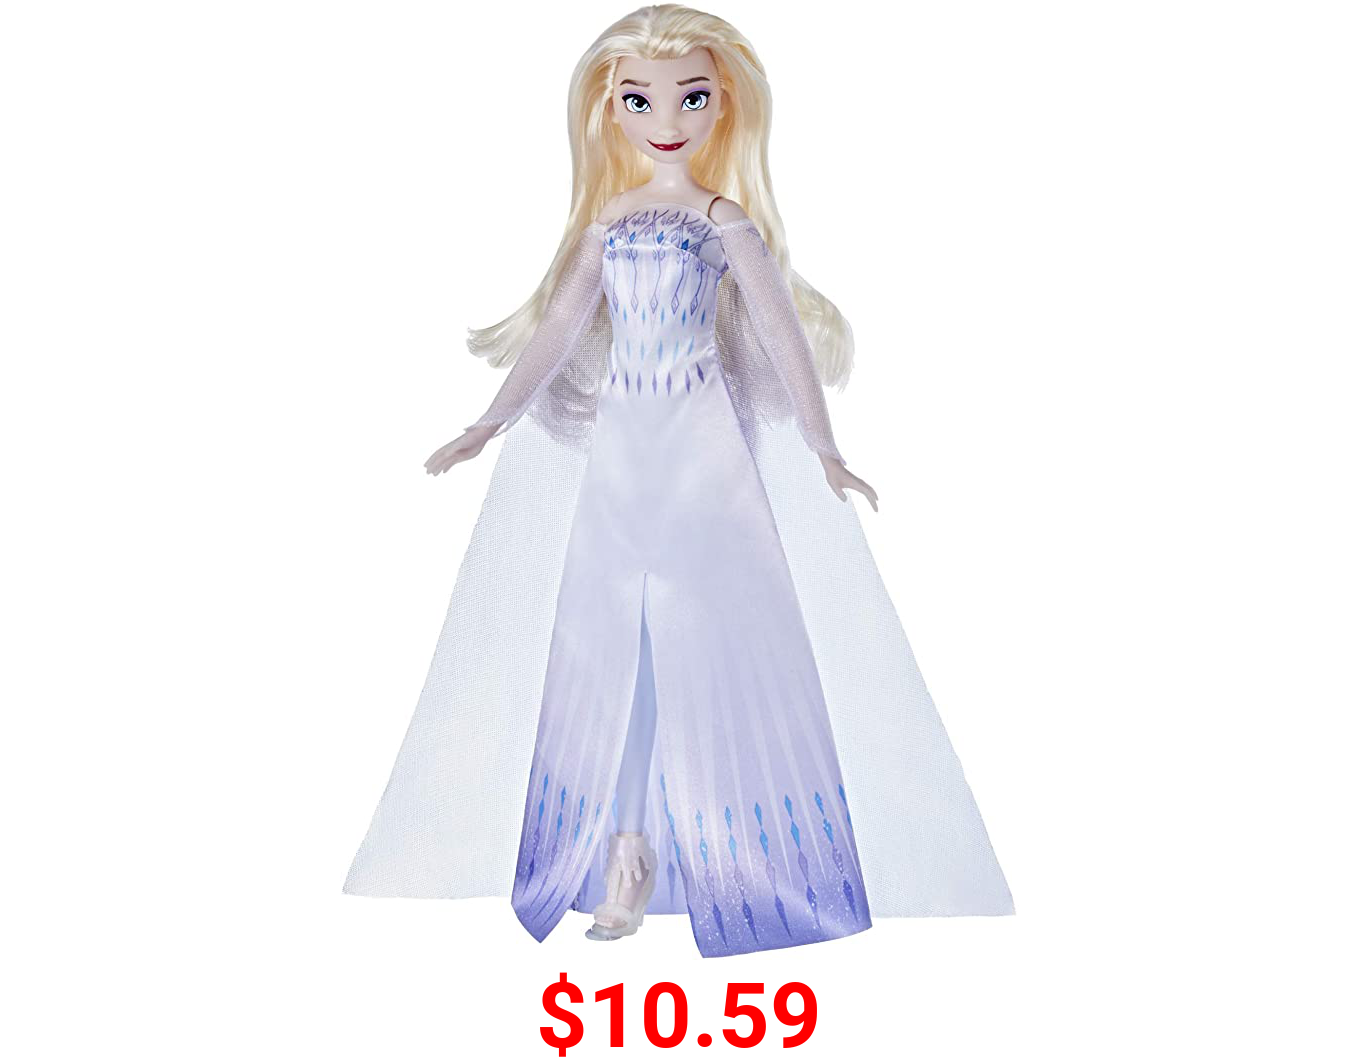 Disney Frozen 2 Snow Queen Elsa Fashion Doll, Dress, Shoes, and Long Blonde Hair, Toy for Kids 3 Years Old and Up